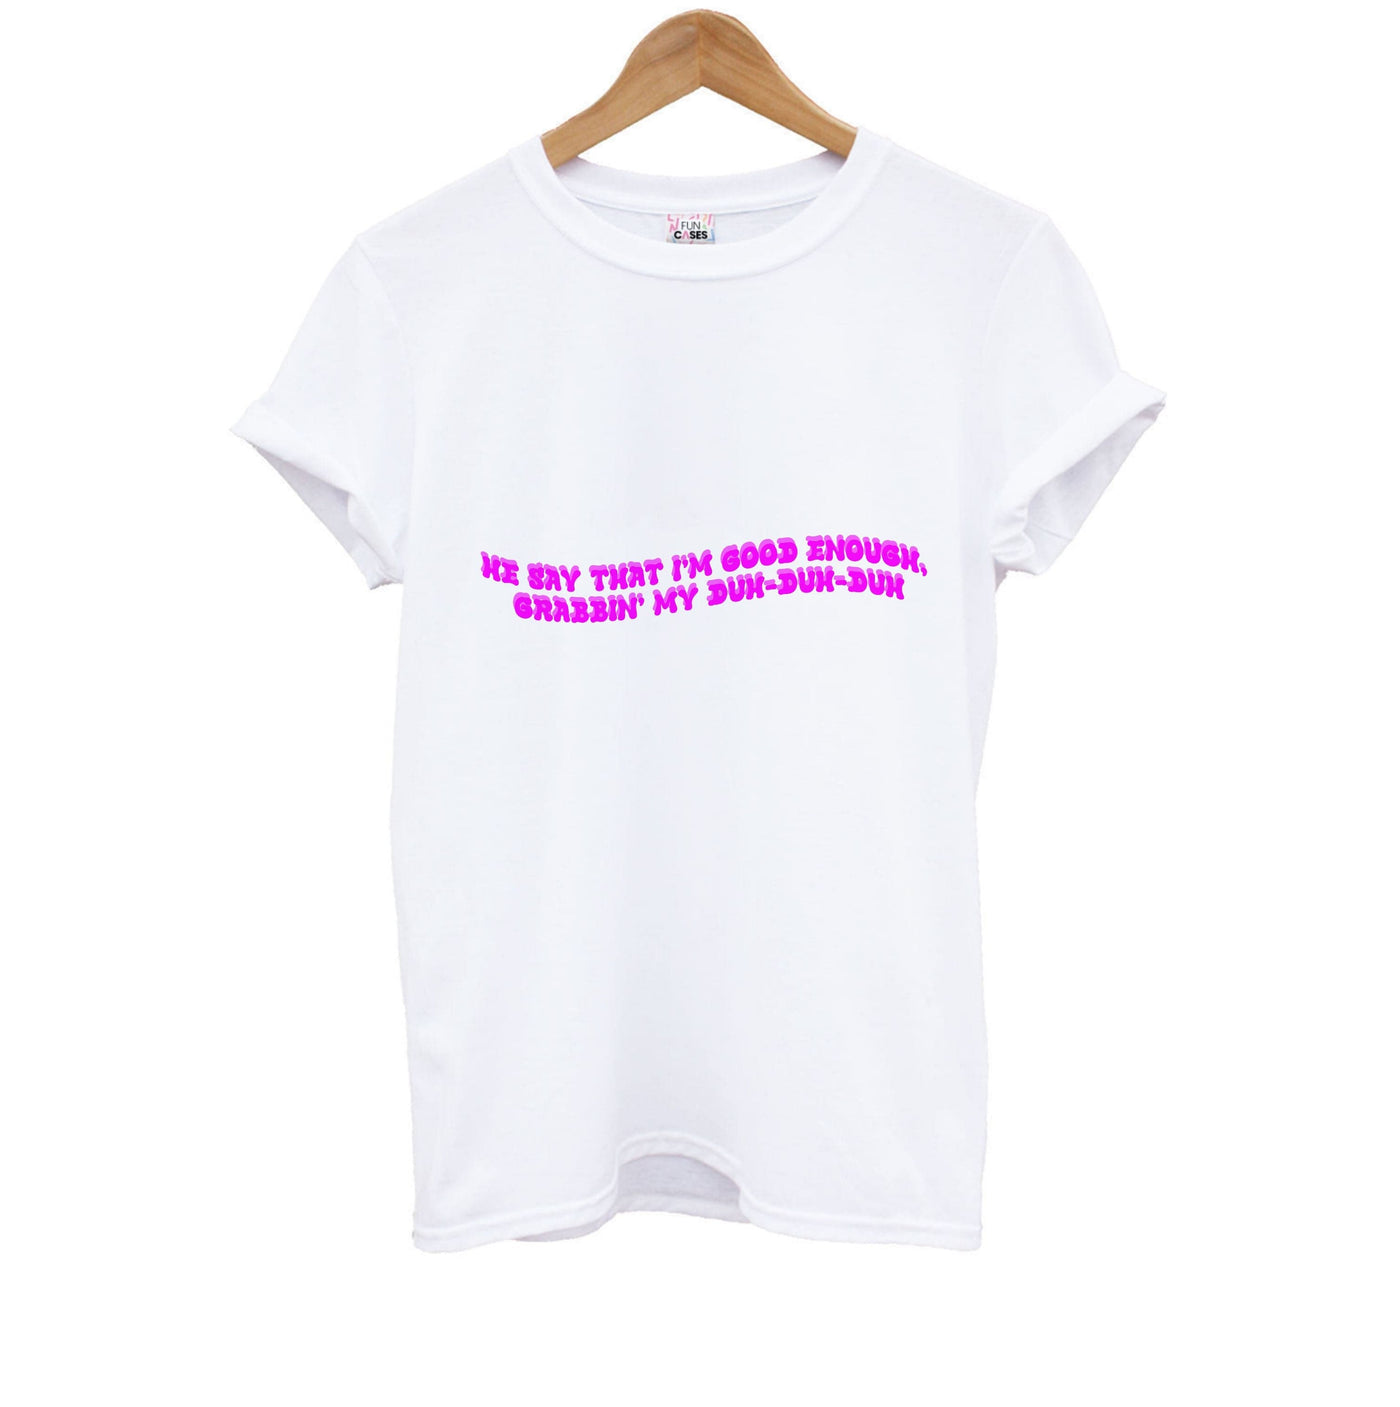 He Say That I'm Good Enough - Ice Spice Kids T-Shirt